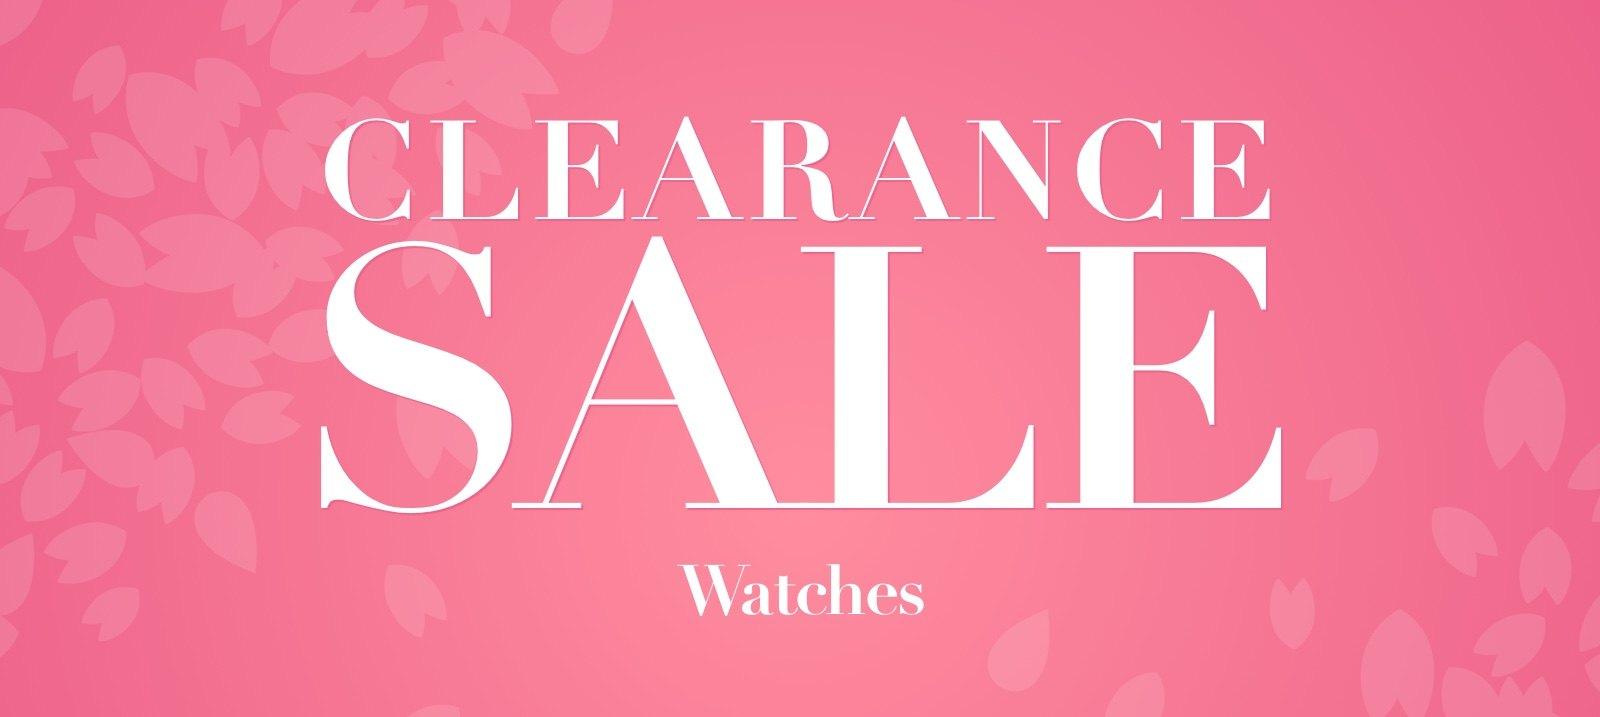 Clearance sale：Watches